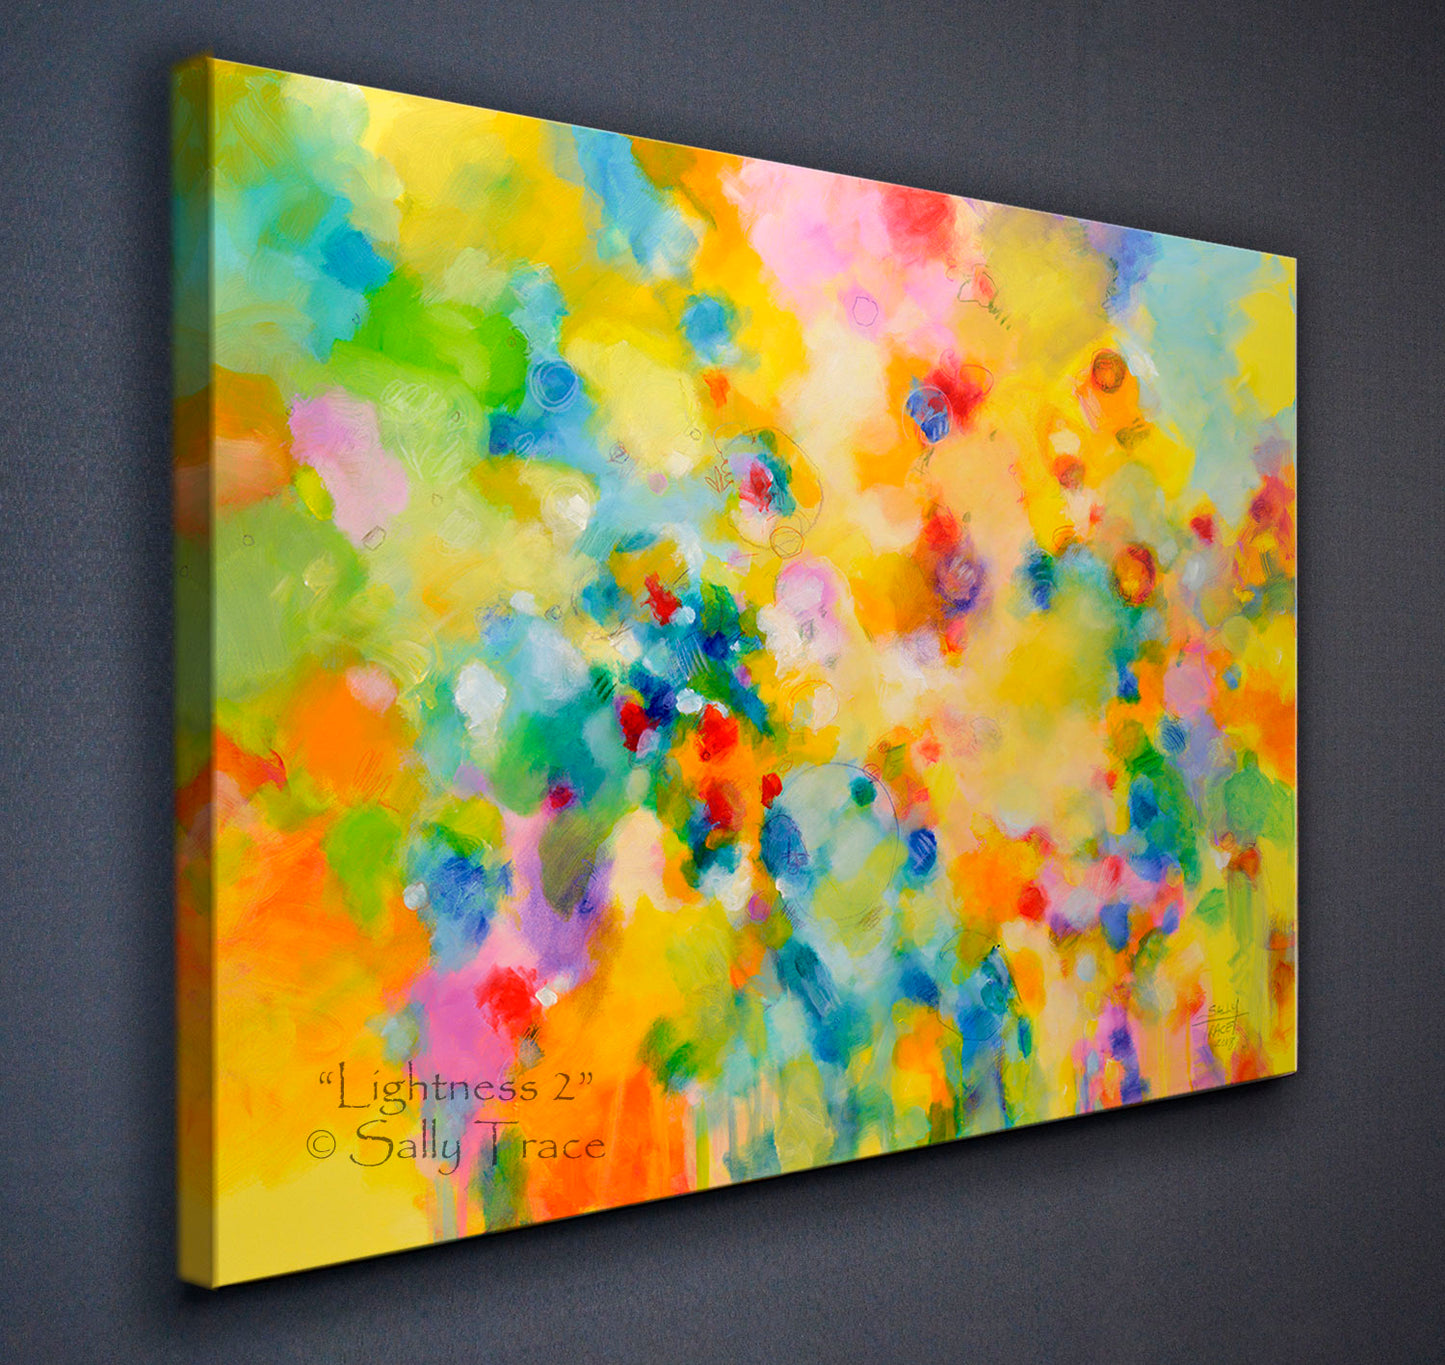 Modern contemporary art for sale by Sally Trace, "Lightness" giclee print on canvas by Sally Trace, side view